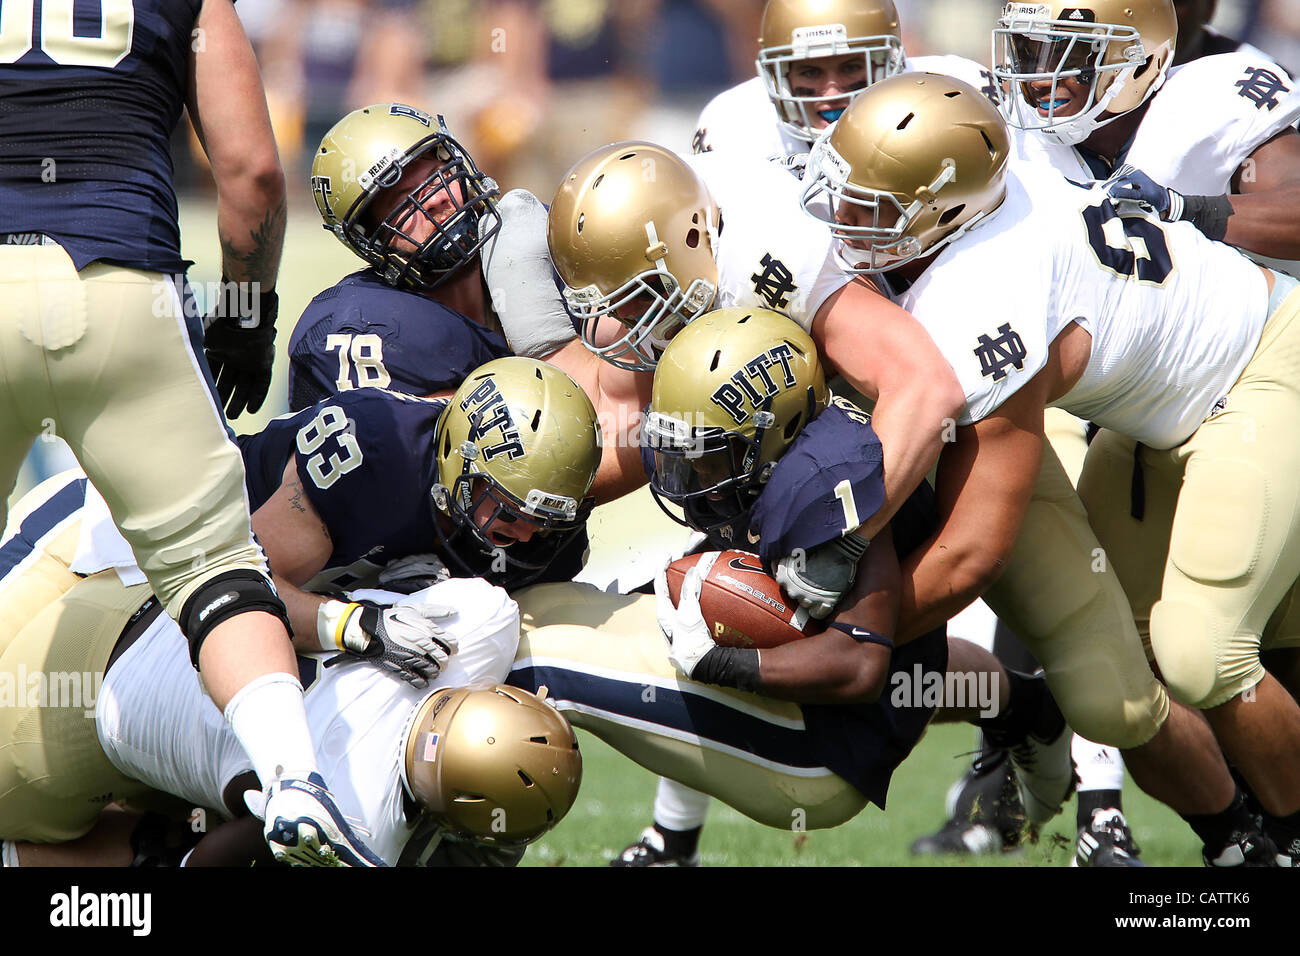 Sept. 23, 2011 - Pittsburgh, Pennsylvania, USA - The Notre Dame Fighting Irish were able to hold onto a slight lead to beat the University of Pittsburgh Panthers in Hienz Field.  Photo By Aaron Suozzi (Credit Image: © Aaron Souzzi/ZUMAPRESS.com) Stock Photo